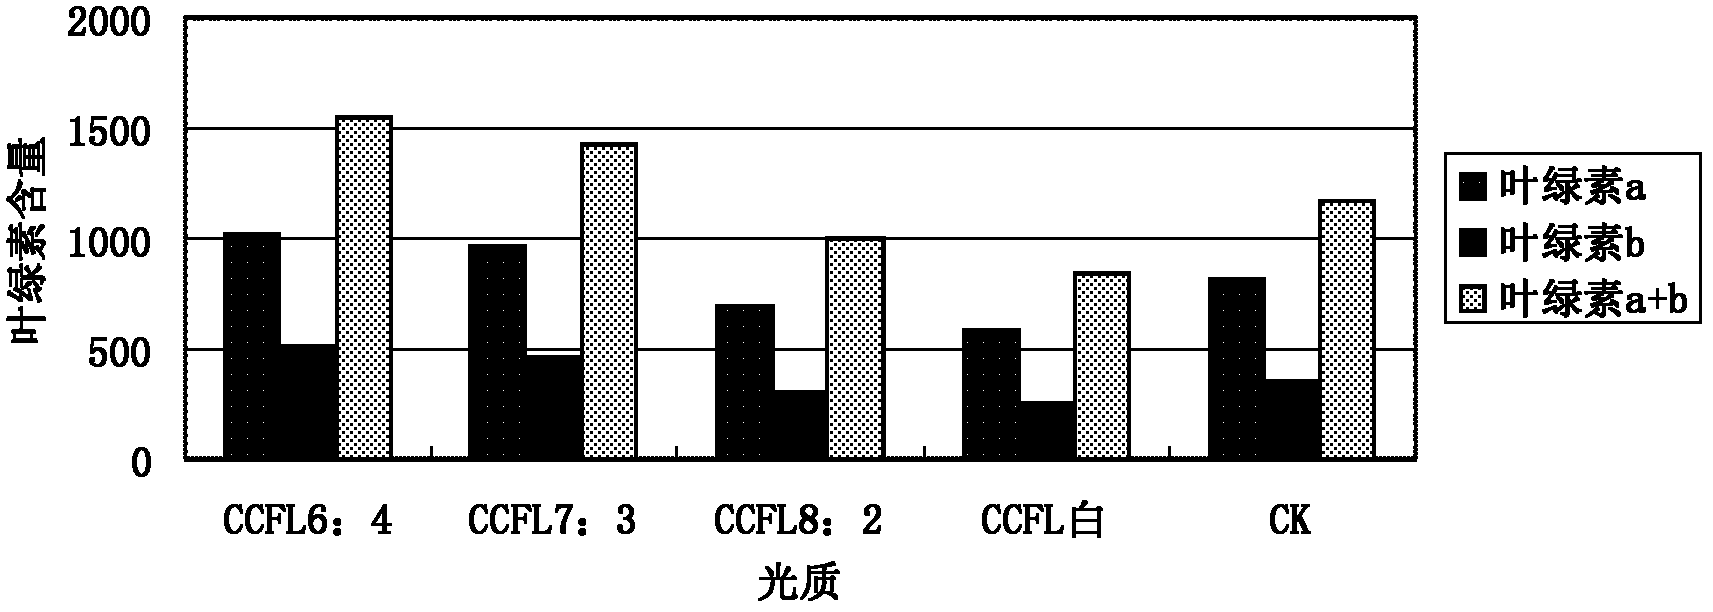 Application of CCFL (cold cathode fluorescent lamp) in plant tissue culture